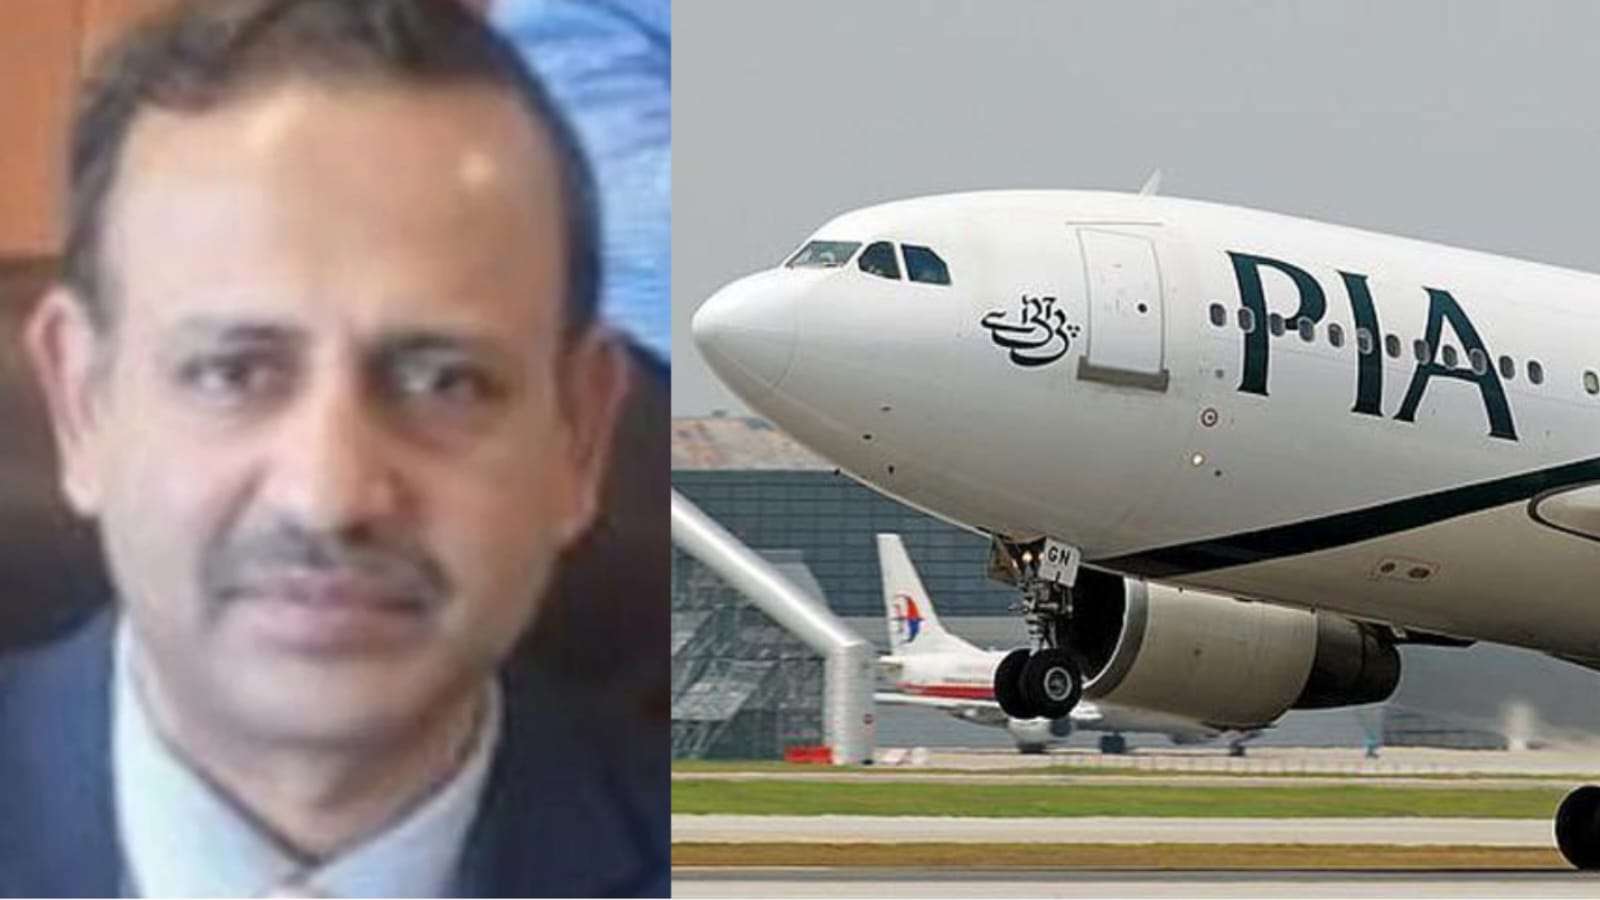 PIA appoints Muhammad Amir Hayat as CEO for one year - ET